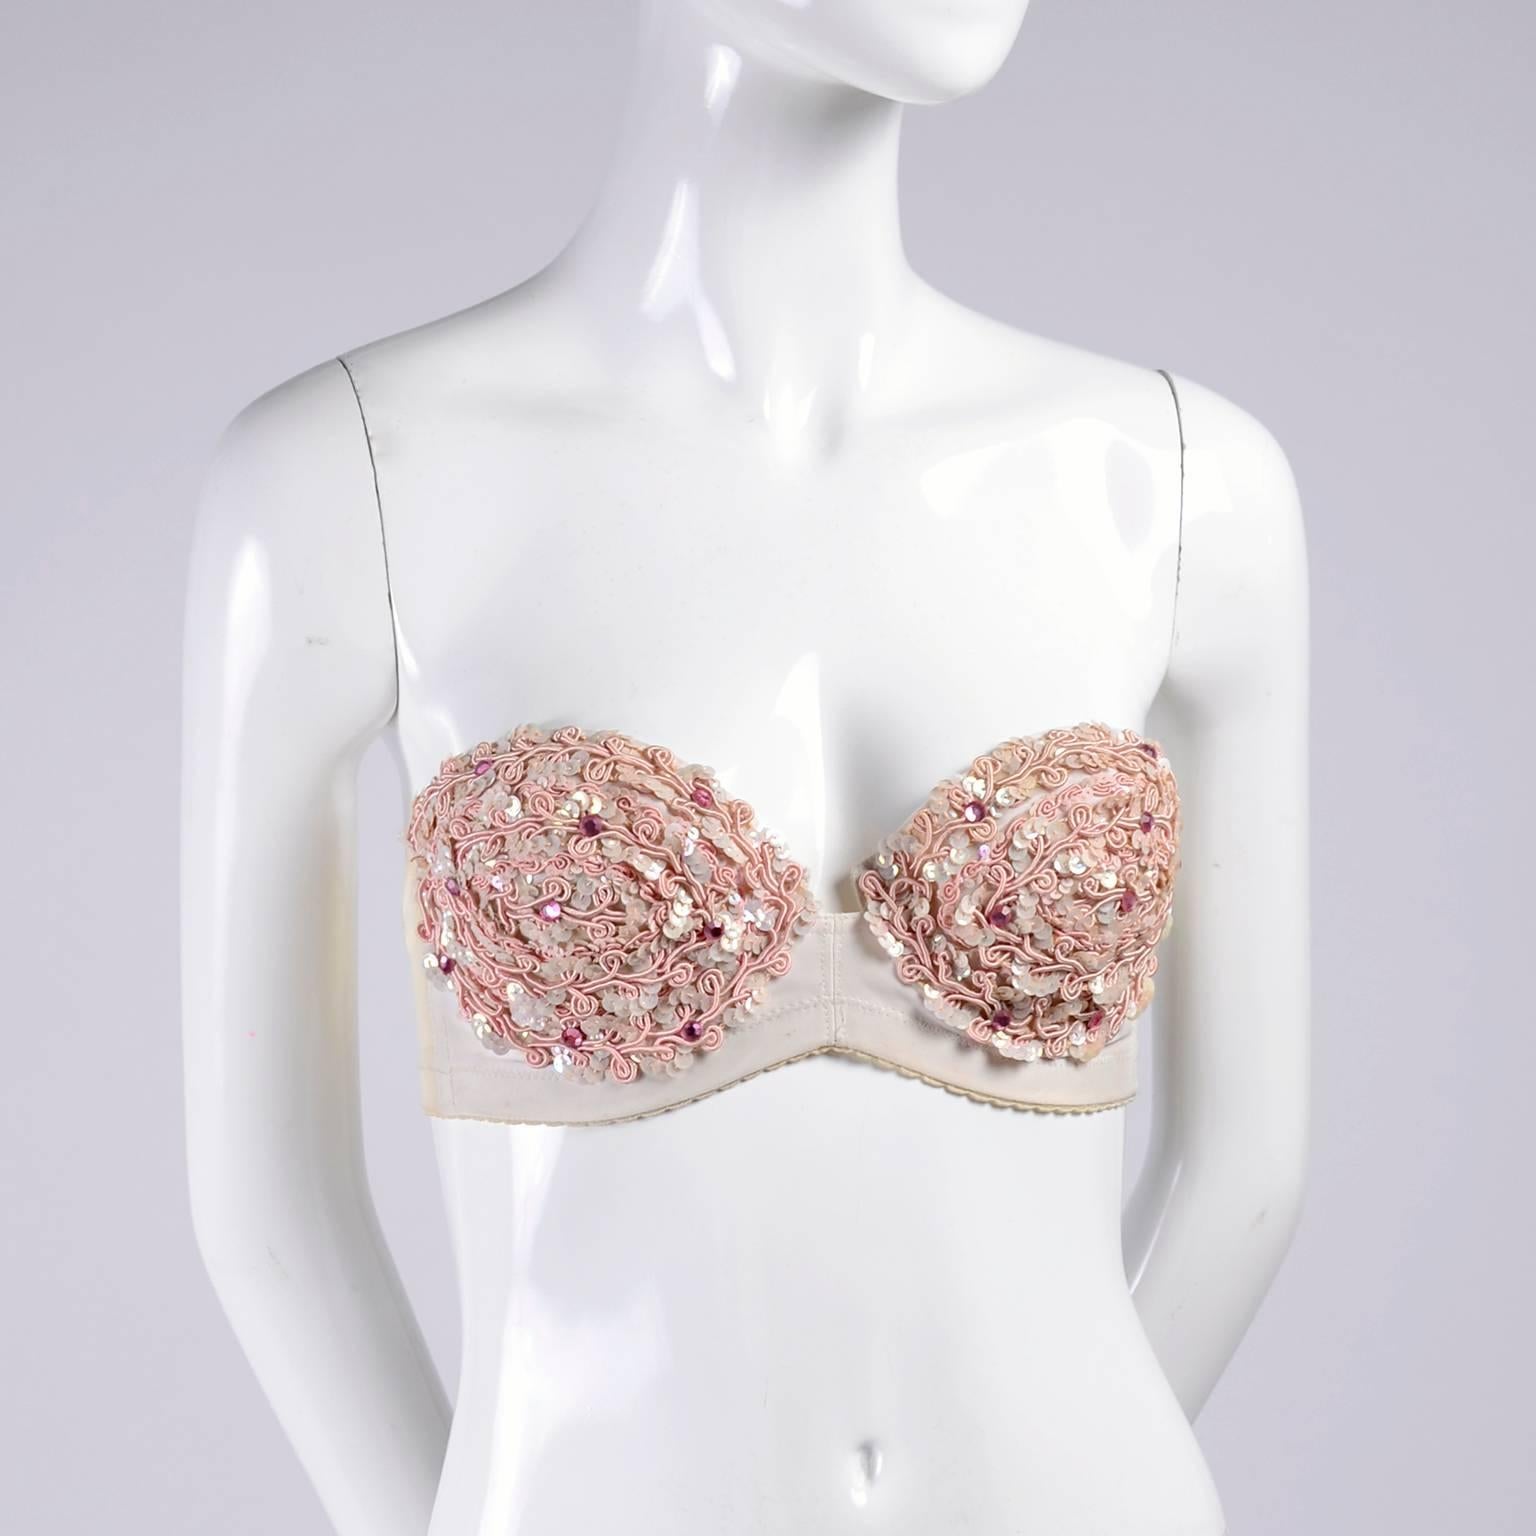 Women's Cher Owned Pink Strapless Sequin Bra With Cher's Autograph inside Of Cup